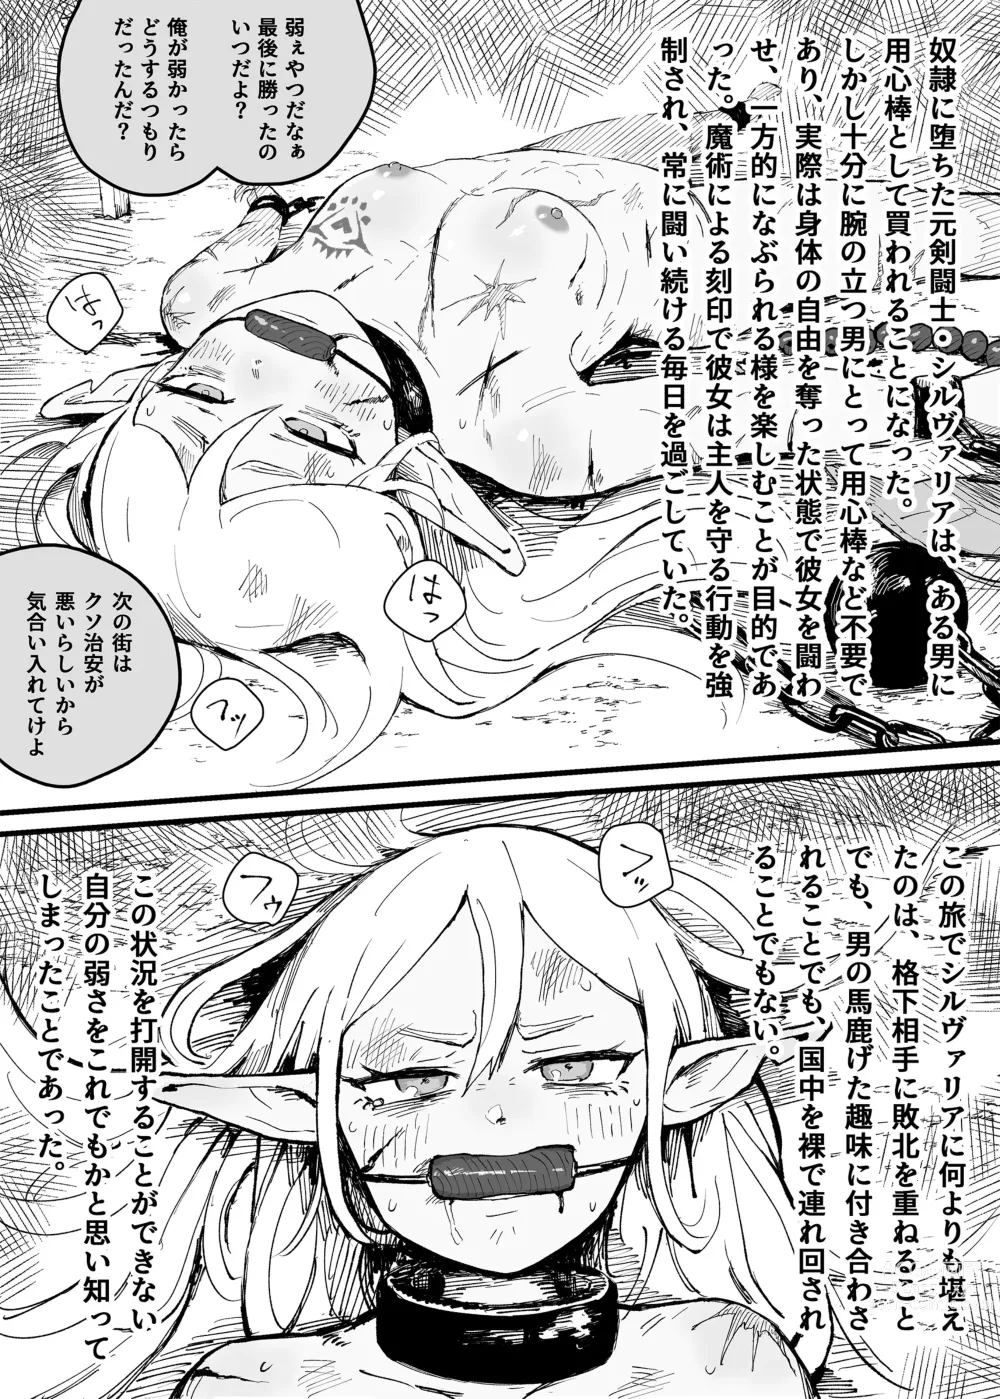 Page 2 of doujinshi How to Use Slave Gladiators